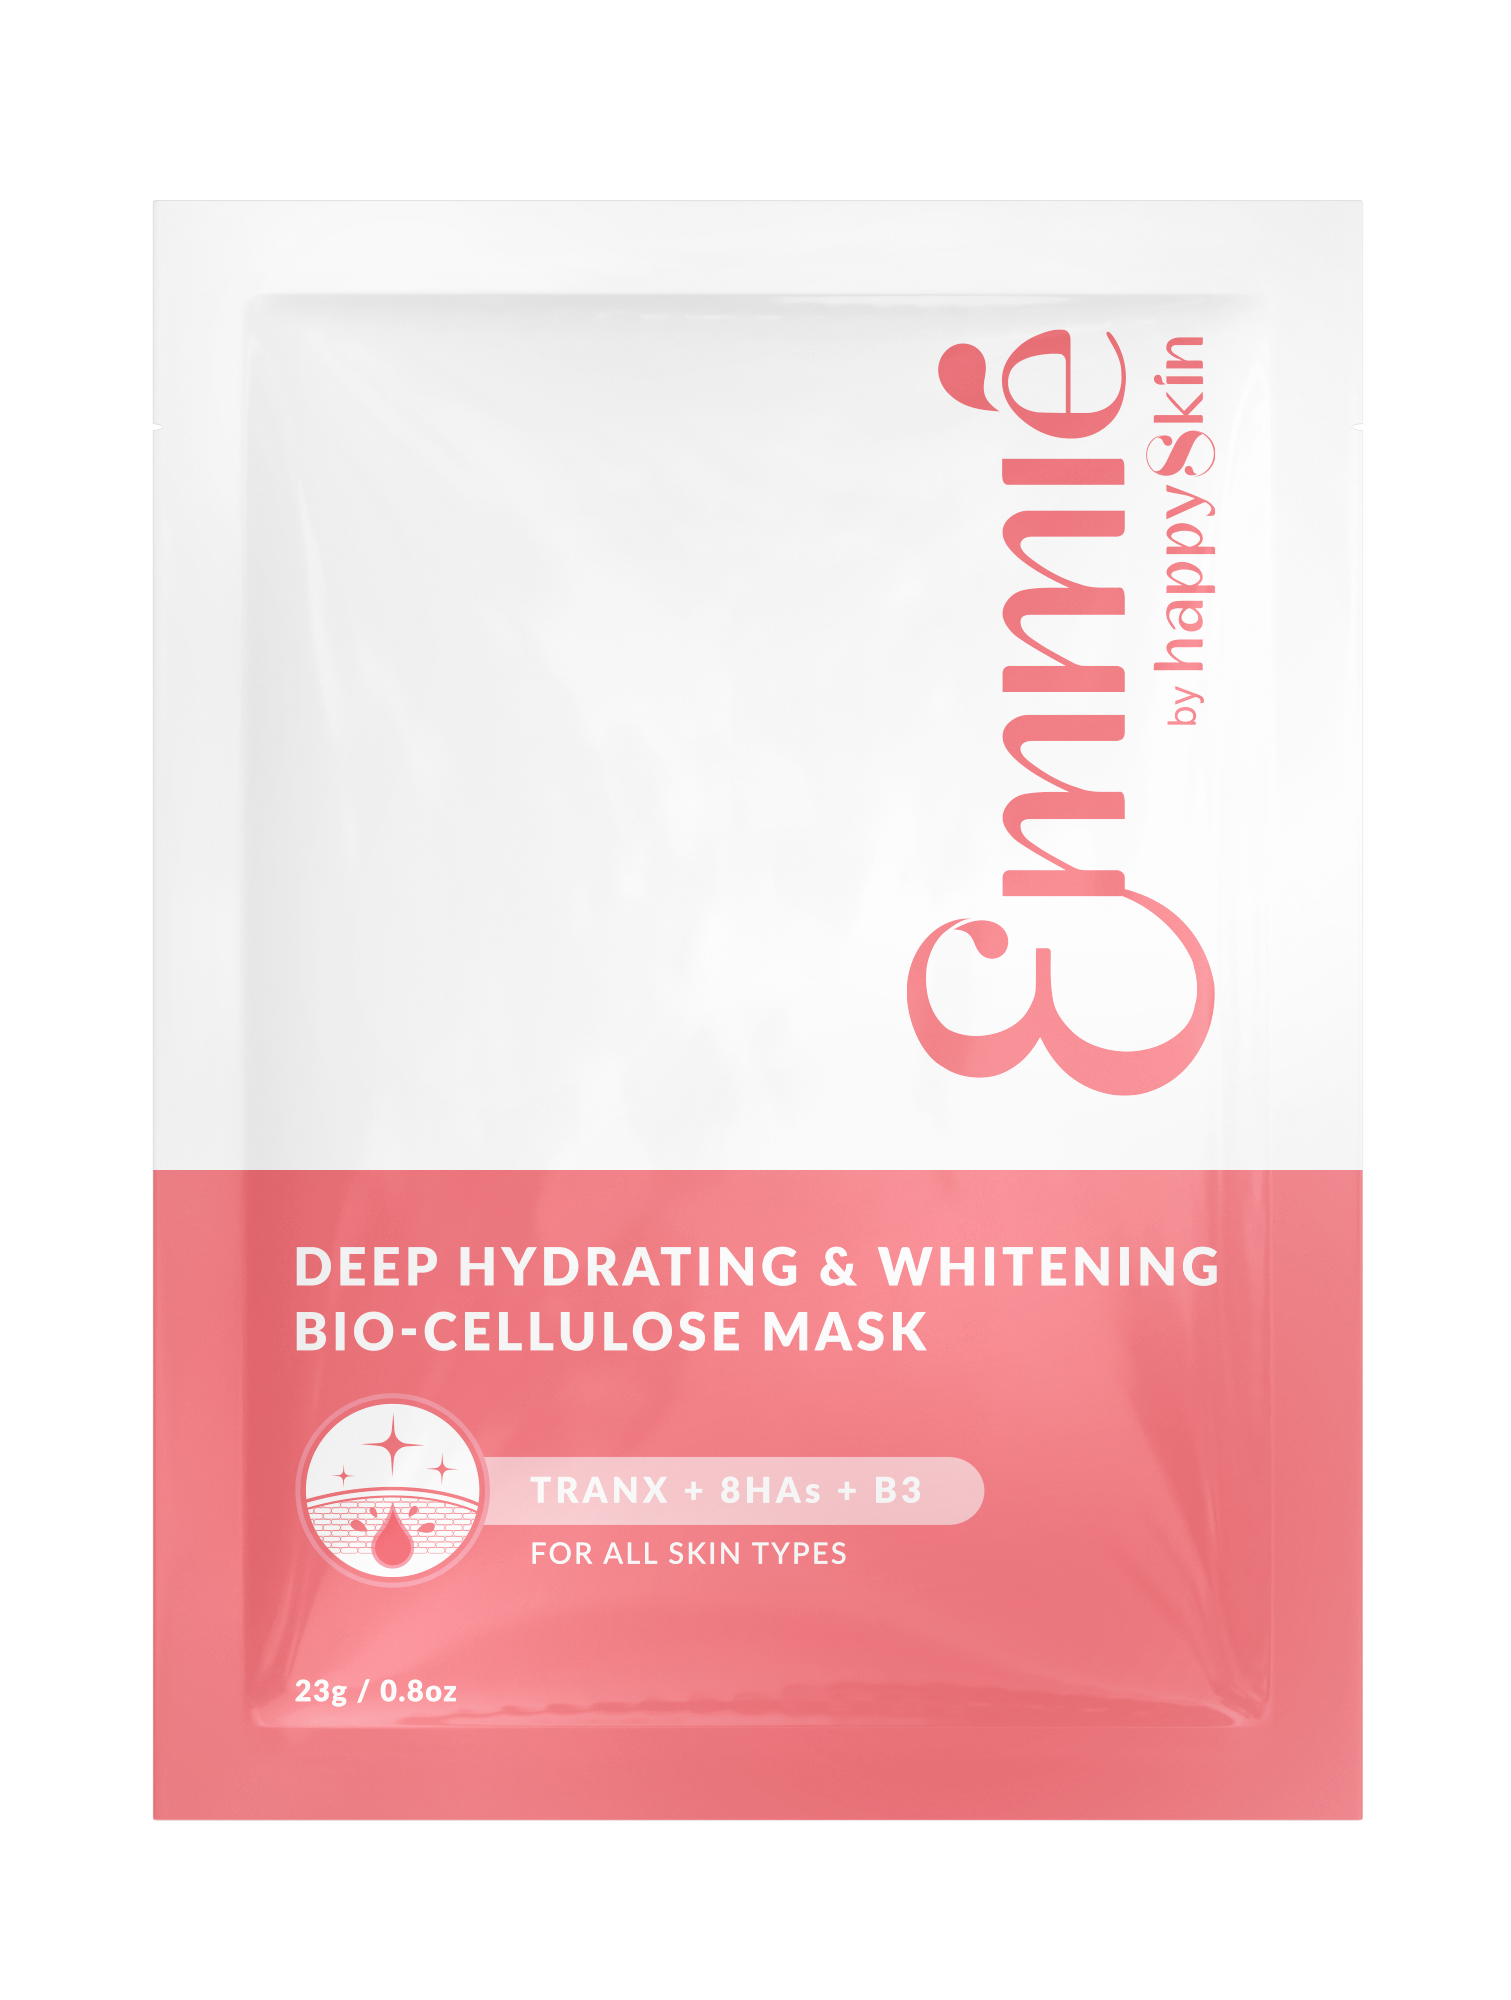 Mặt Nạ Dưỡng Trắng Super Hydrating & Whitening Bio Cellulose Mask Emmié by HappySkin